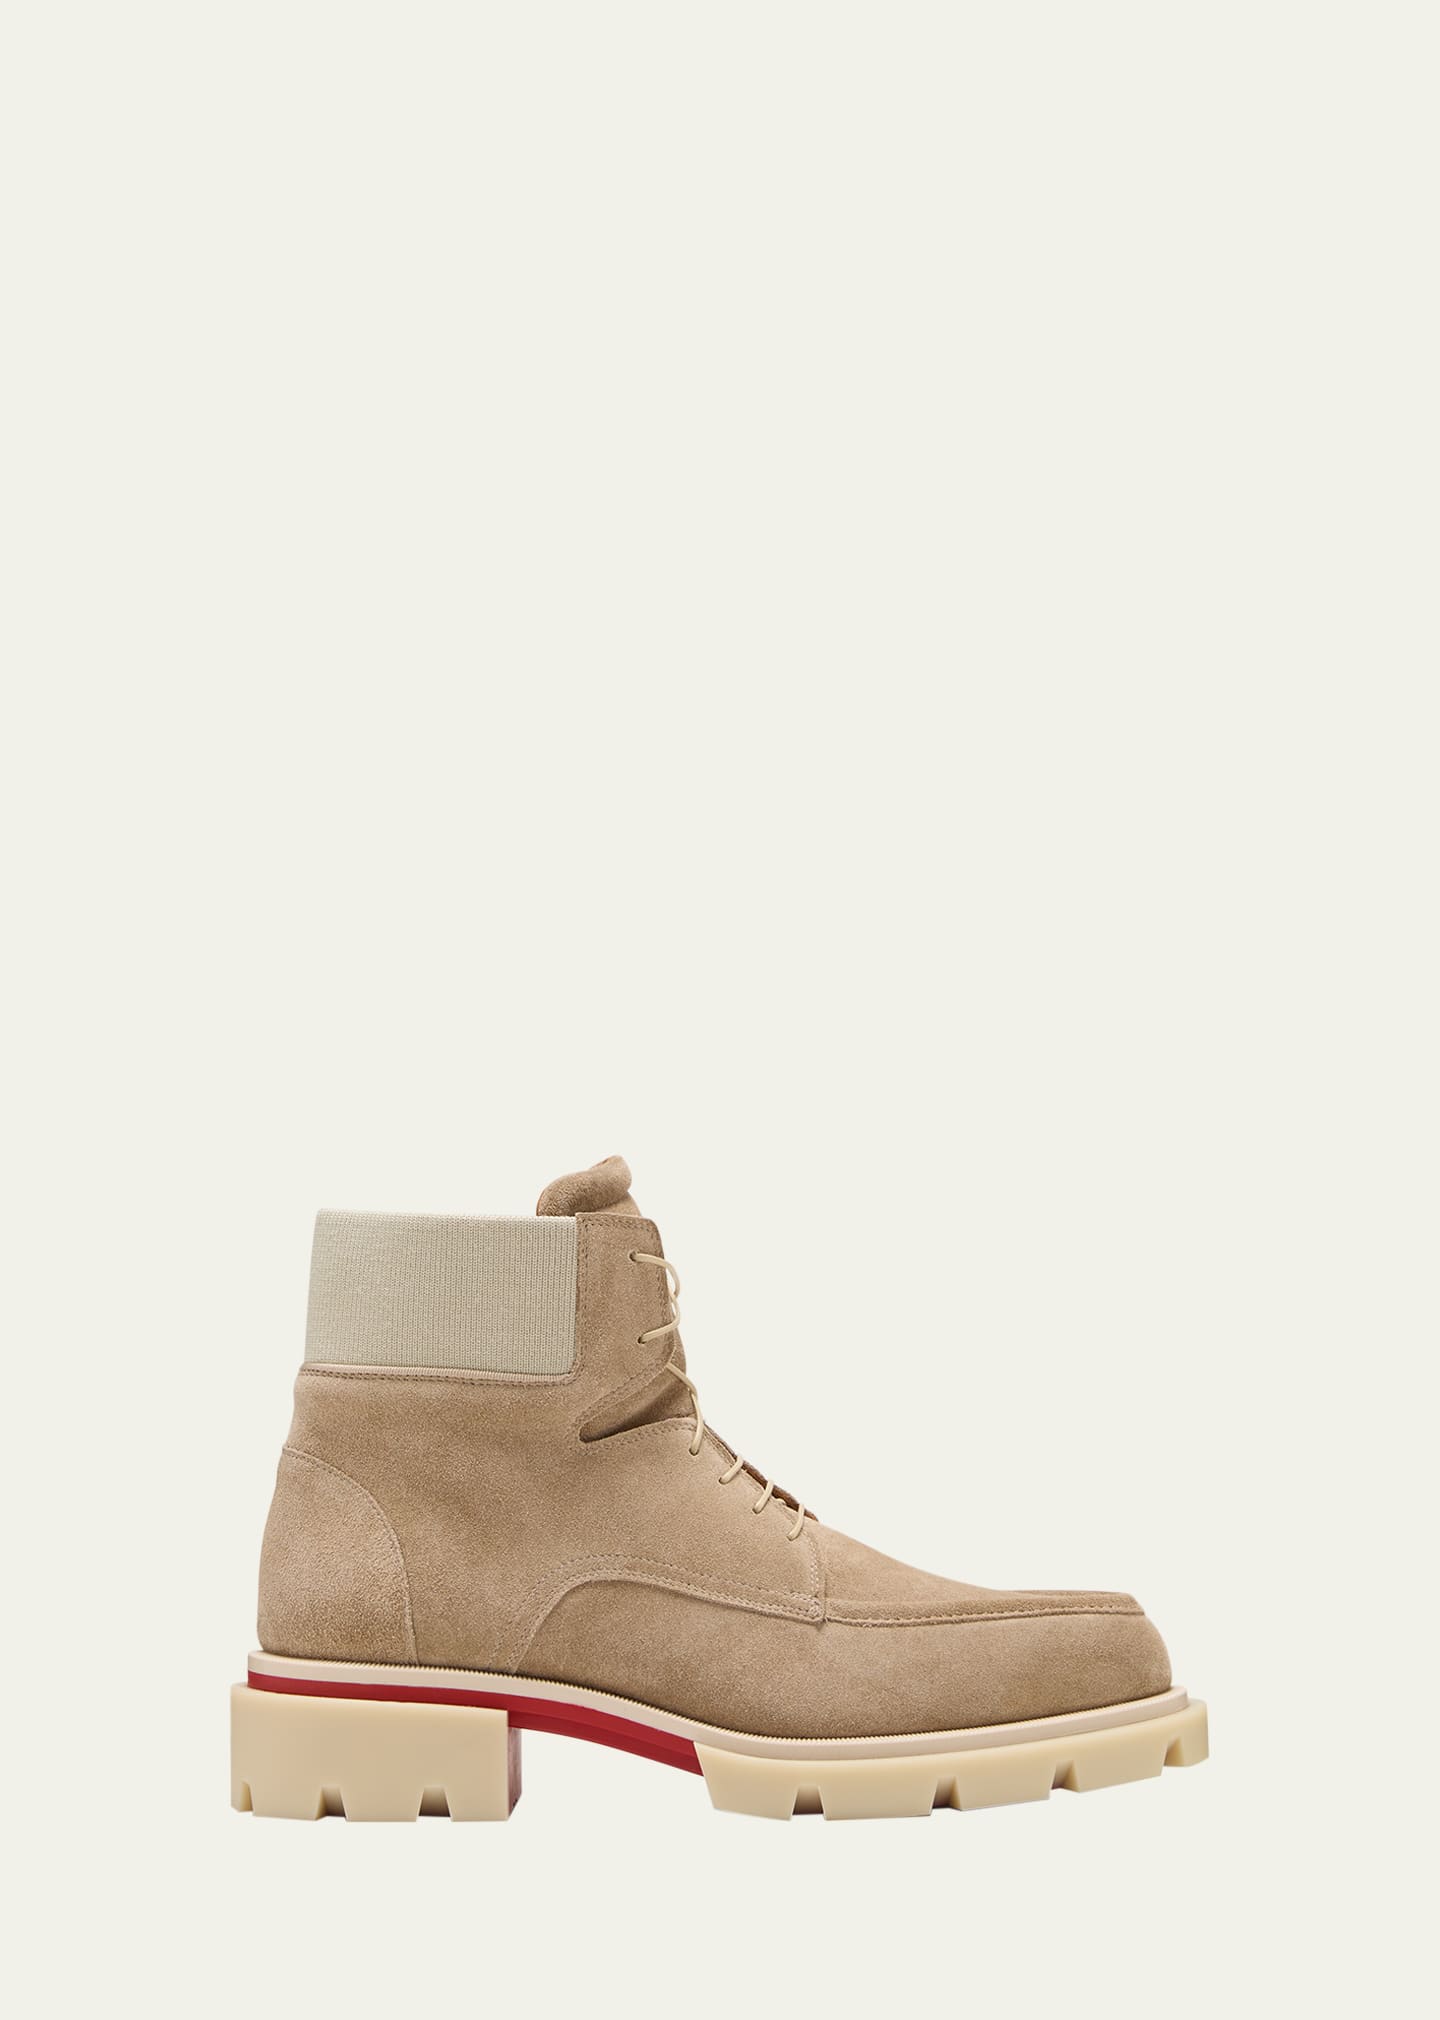 CHRISTIAN LOUBOUTIN MEN'S OUR WALK SUEDE LACE-UP BOOTS